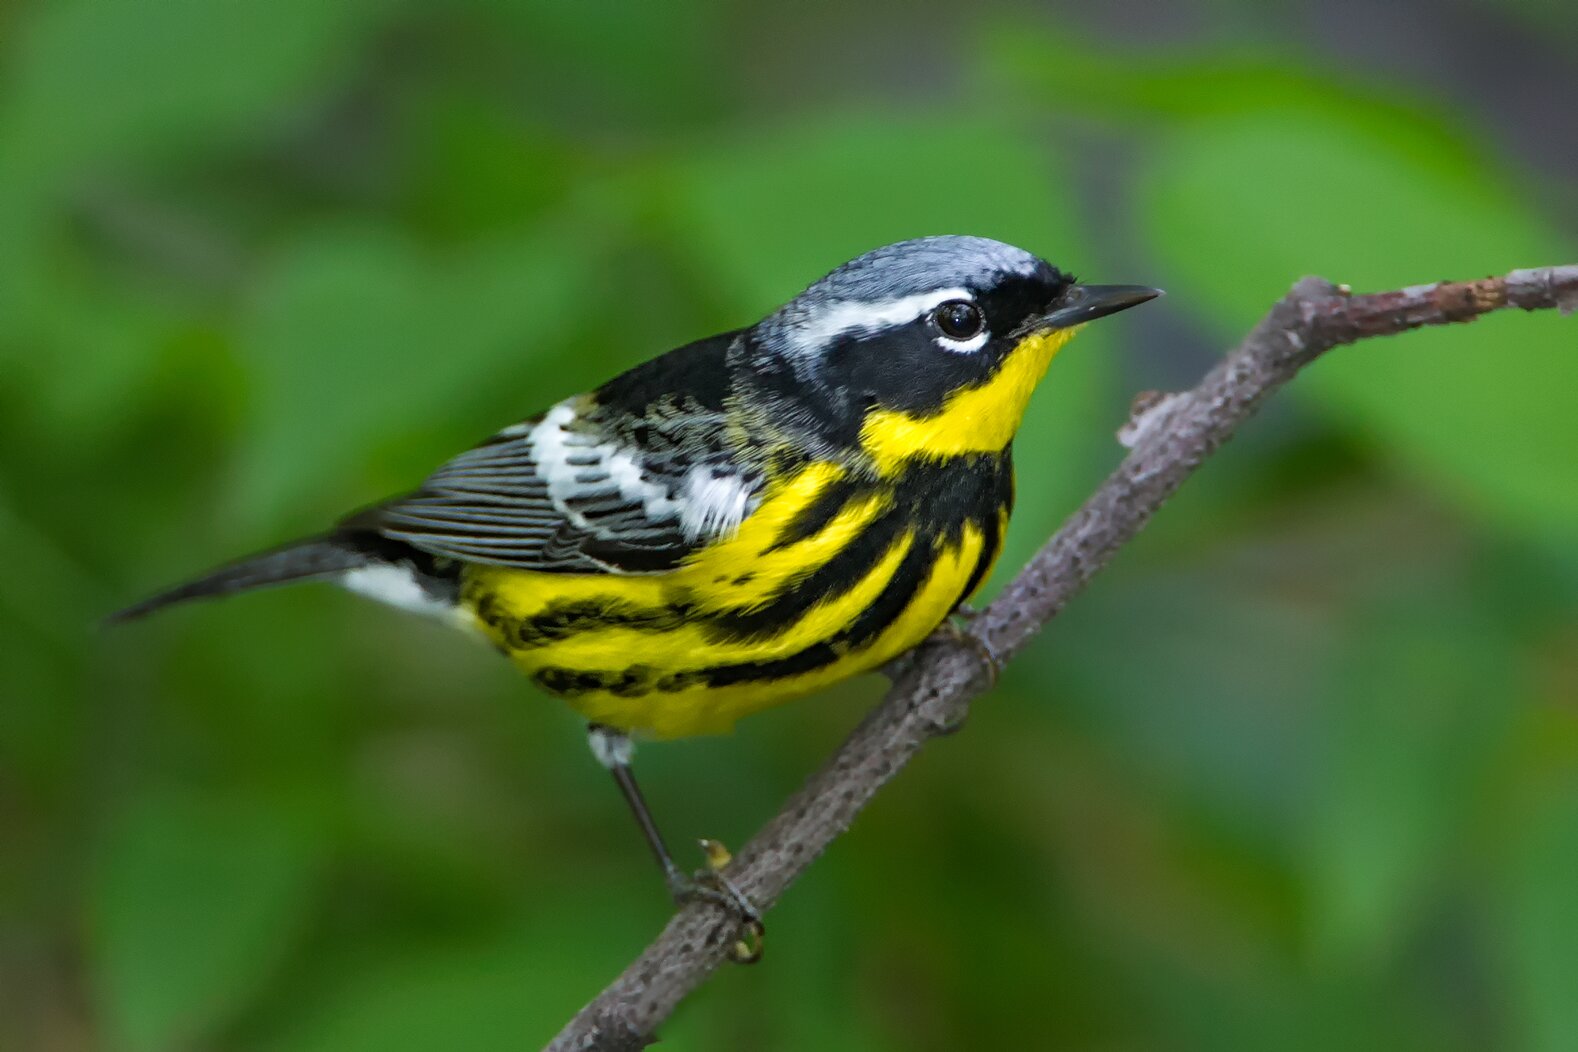 The orchard-like meadows and trees of Crotona Park are a great place to watch migrating songbirds like the Magnolia Warbler. Photo: Lloyd Spitalnik